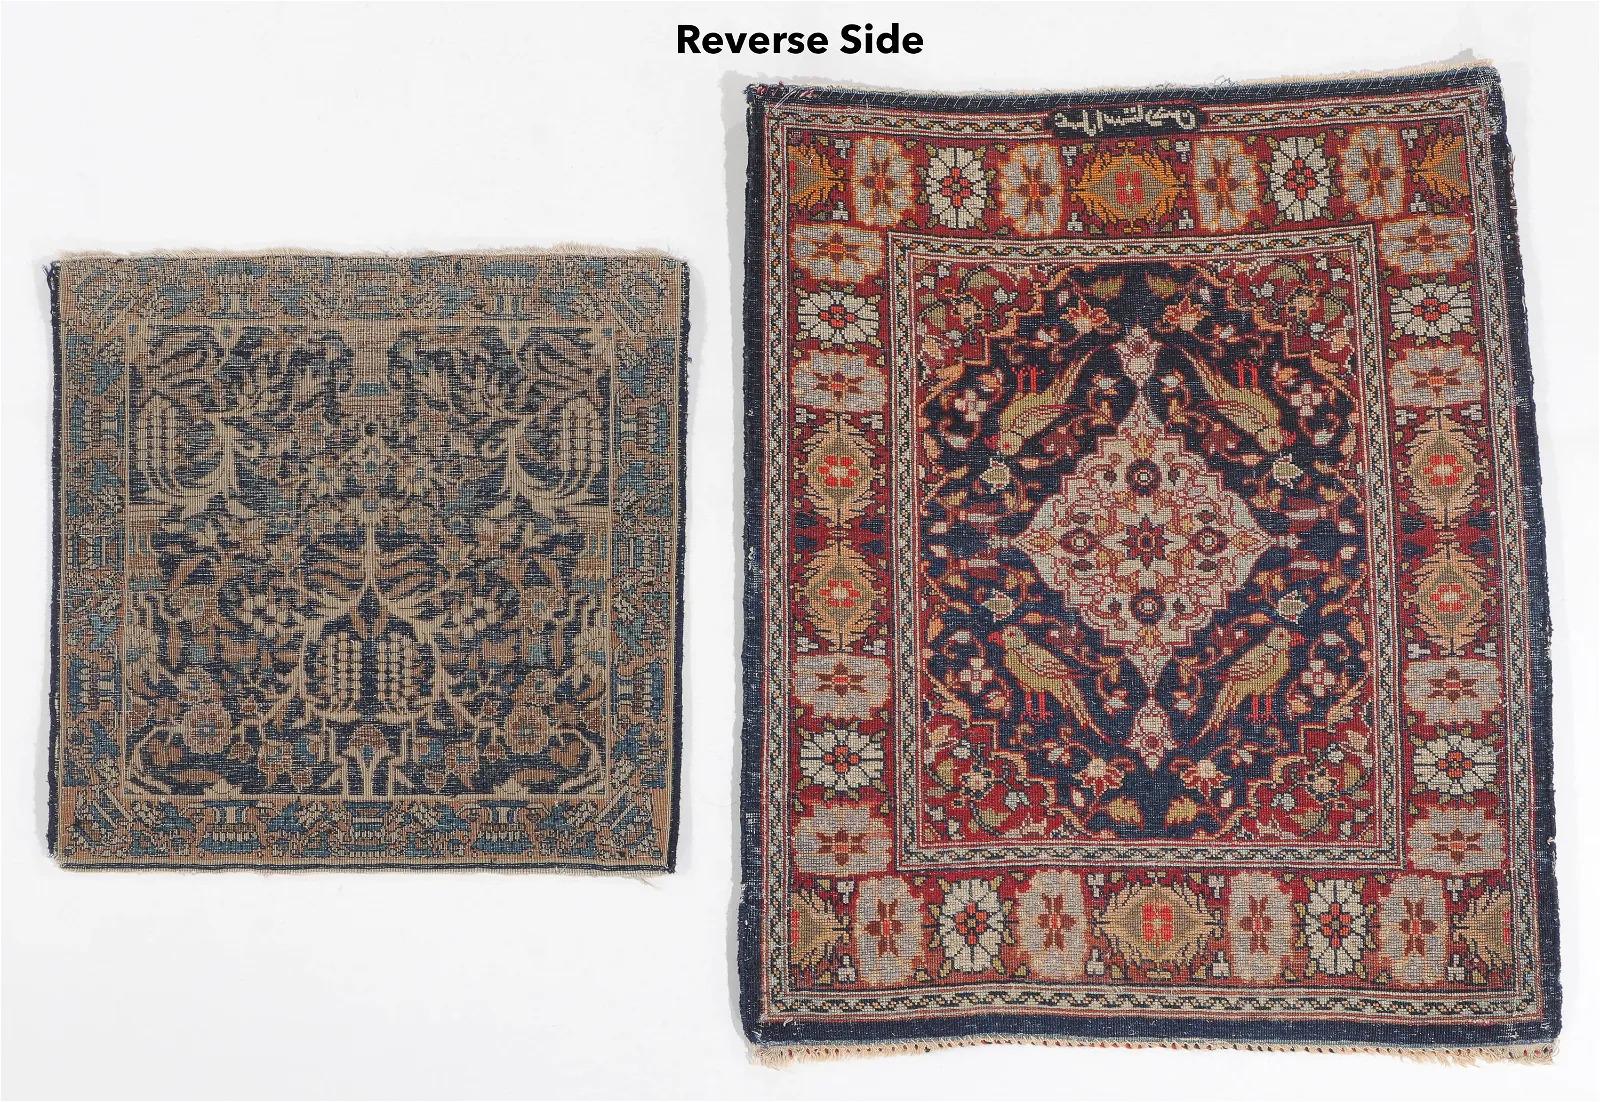 Wool Lot of 2 Antique Persian Sarouk and Yazd Rugs 2' x 2.5', 1900s - 2B32 For Sale